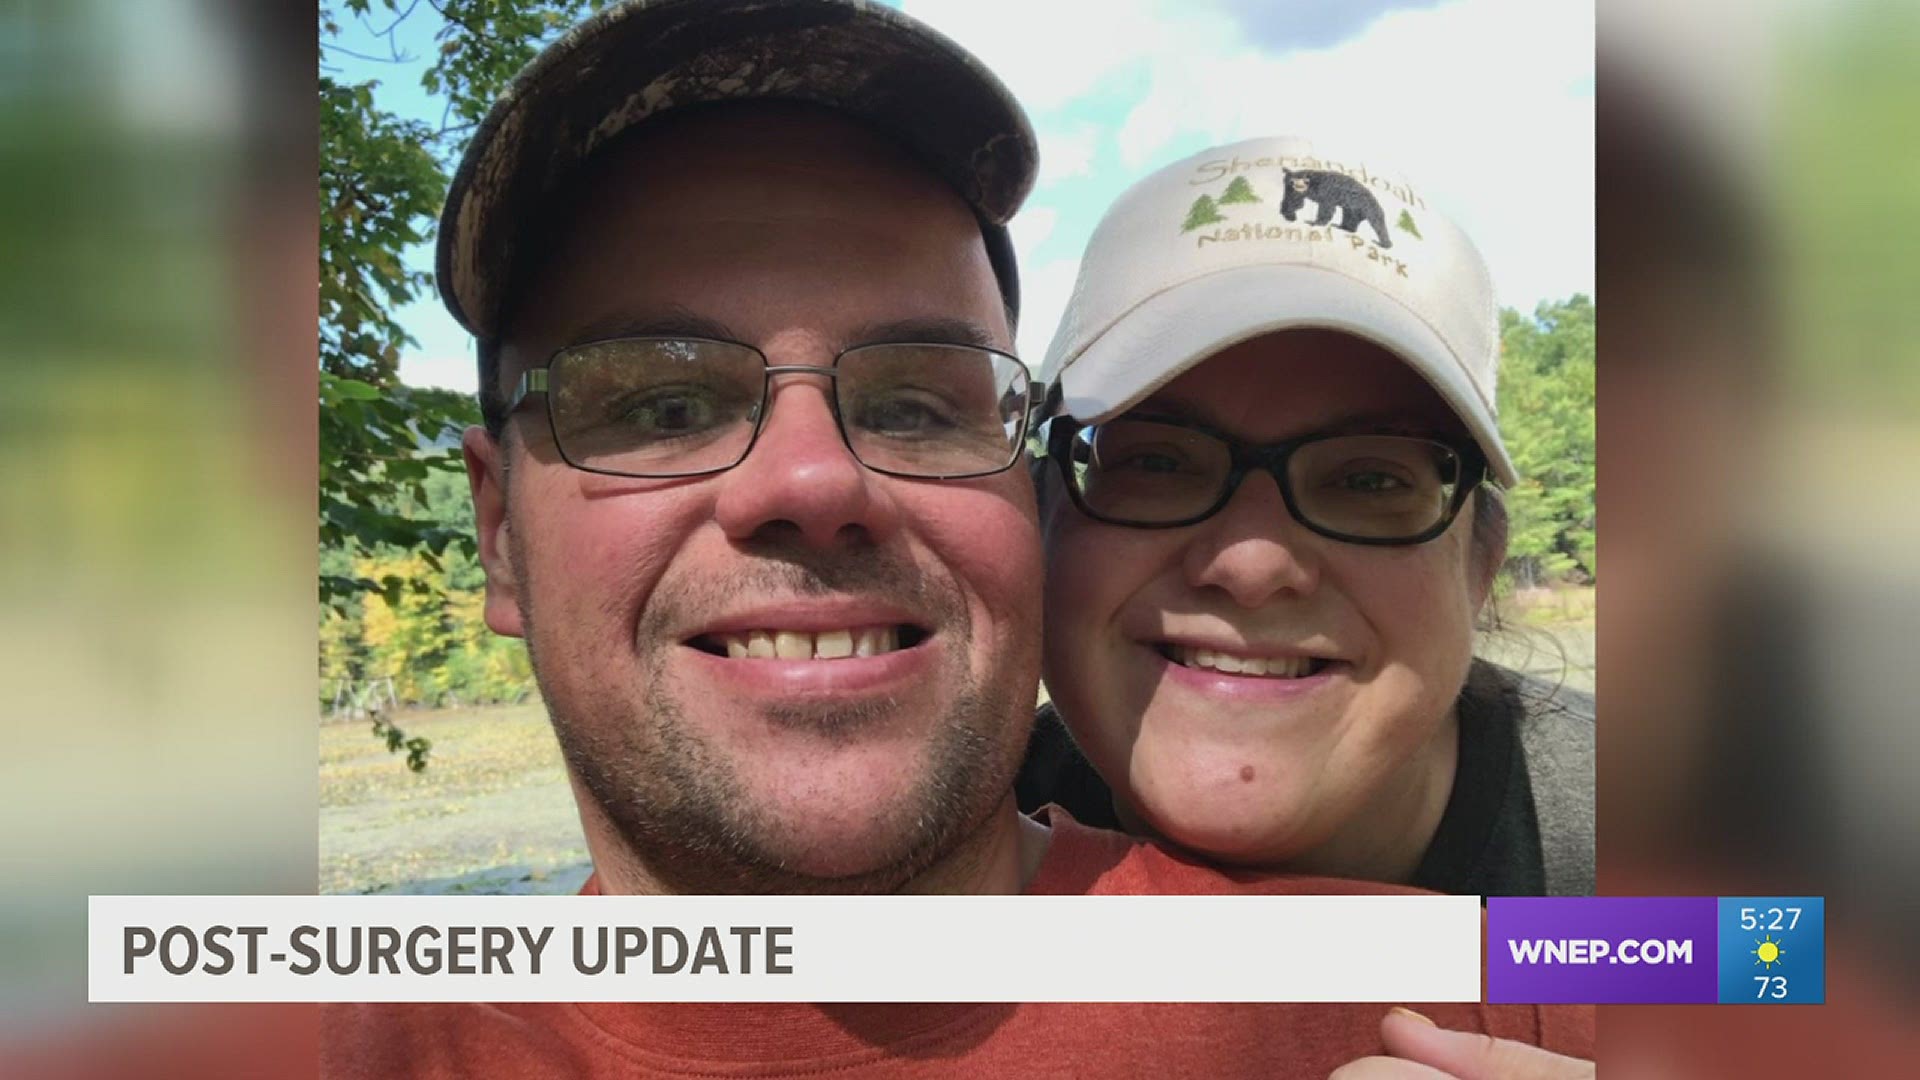 It's a success story for a man from Mifflinburg after his weight-loss surgery during the pandemic.